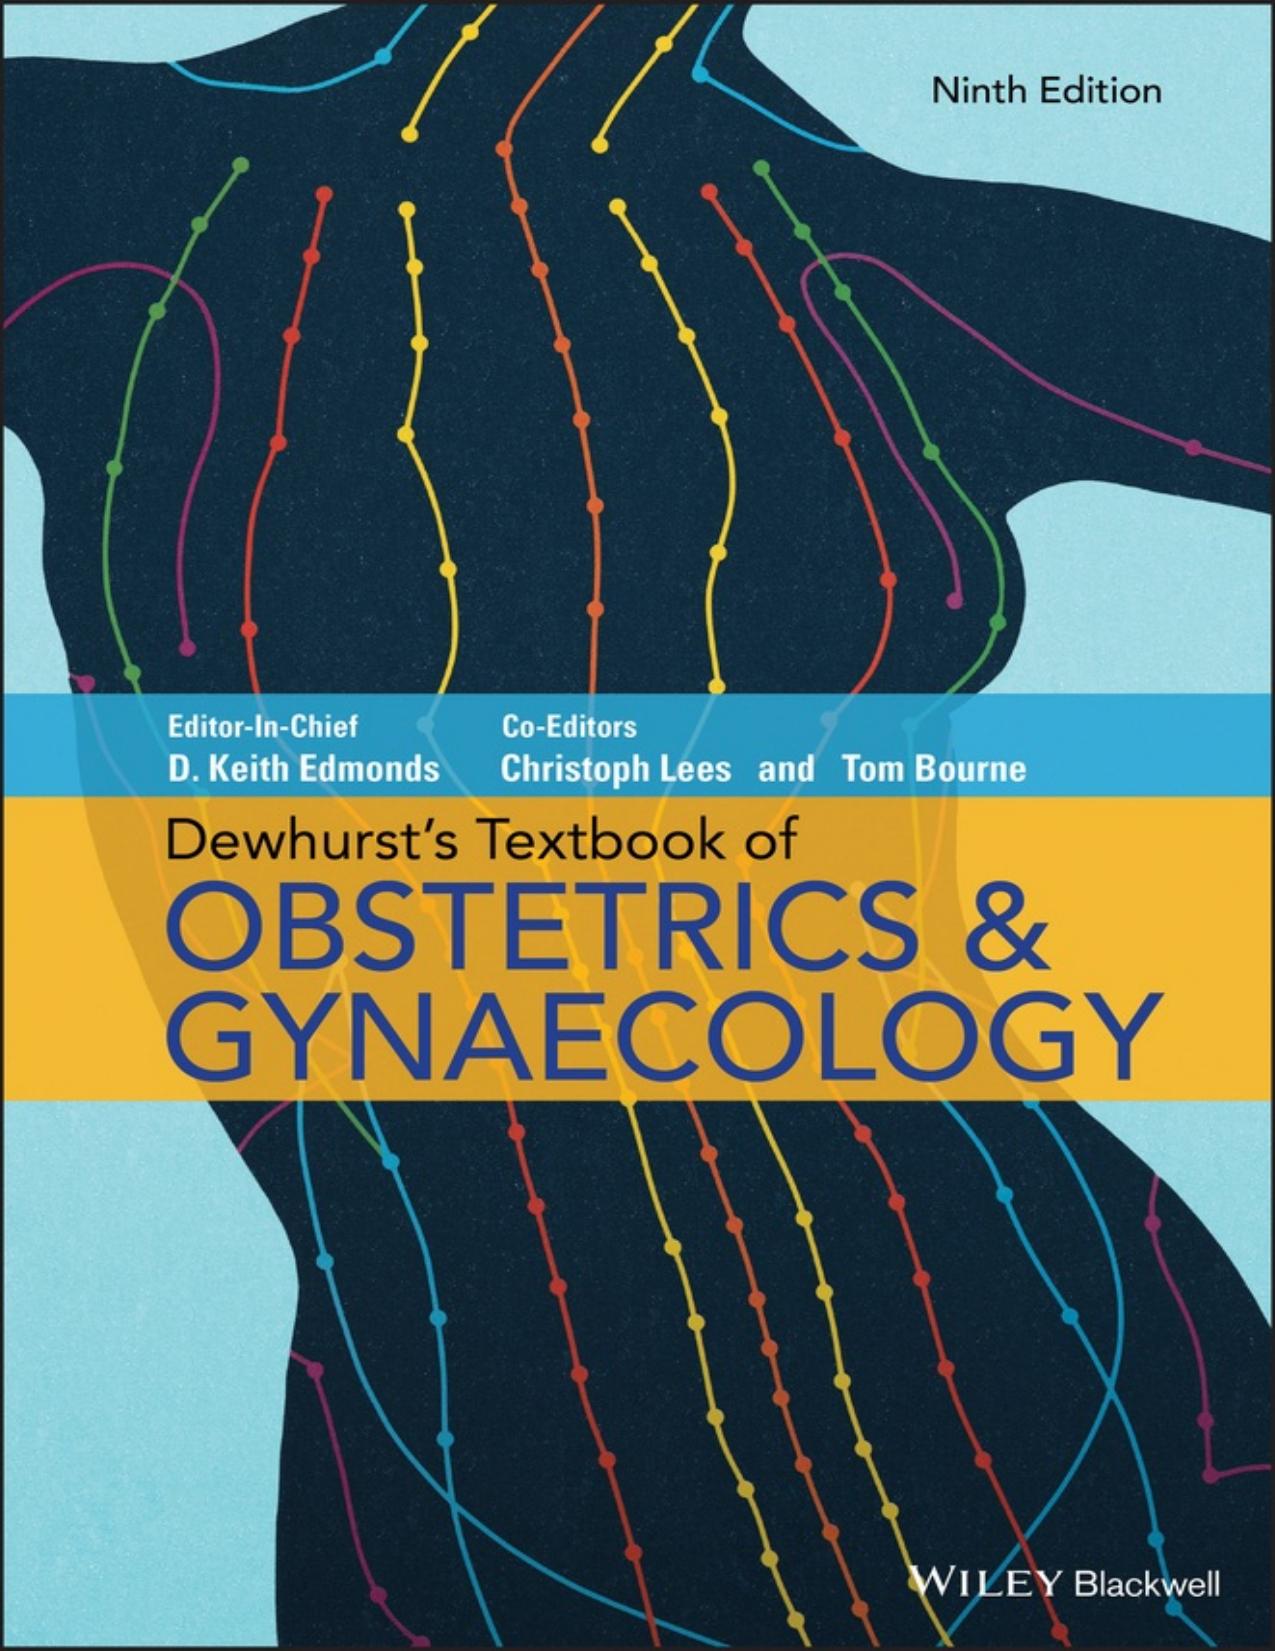 Dewhurst’s Textbook of Obstetrics and Gynaecology